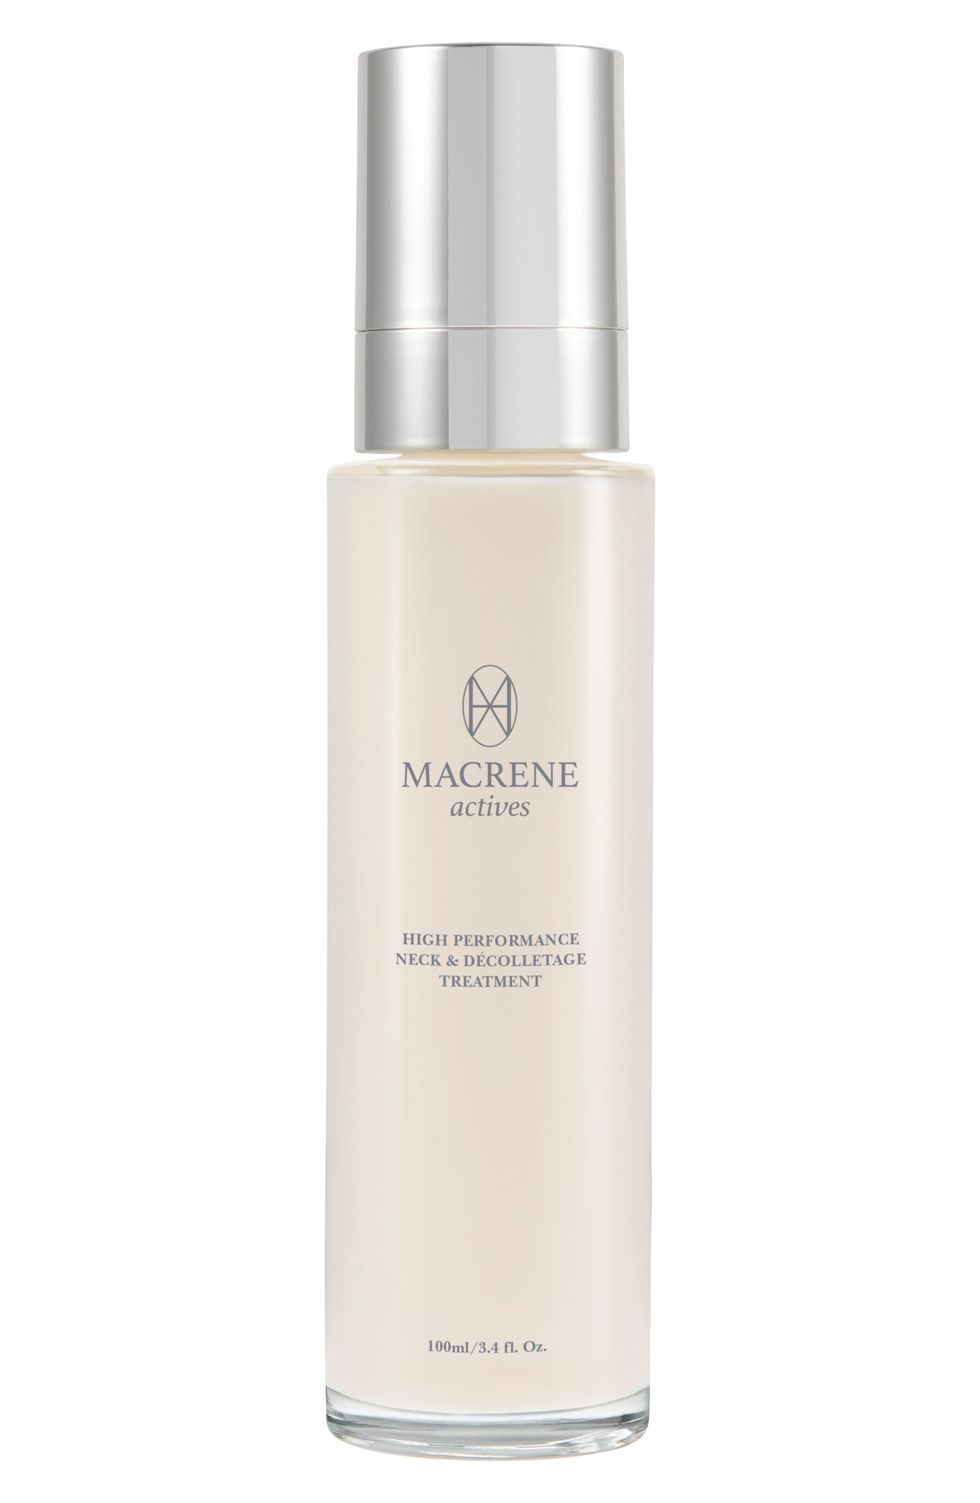 MACRENE ACTIVES High Performance Neck & Decolletage Treatment at Nordstrom